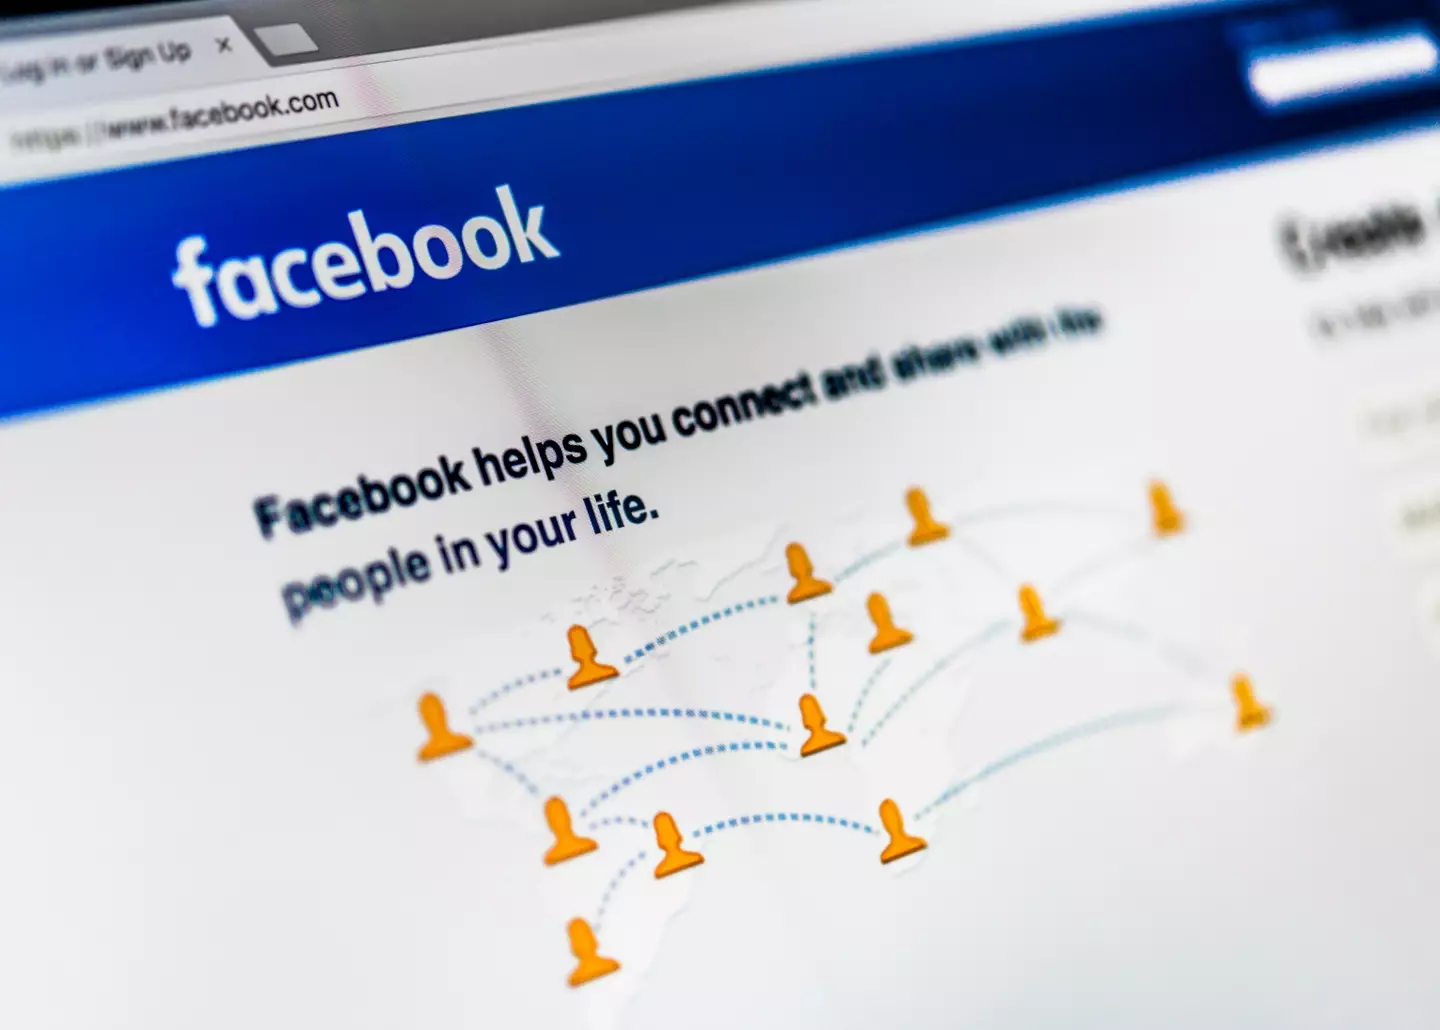 If you've not updated your Facebook security settings for a while, it might be time.